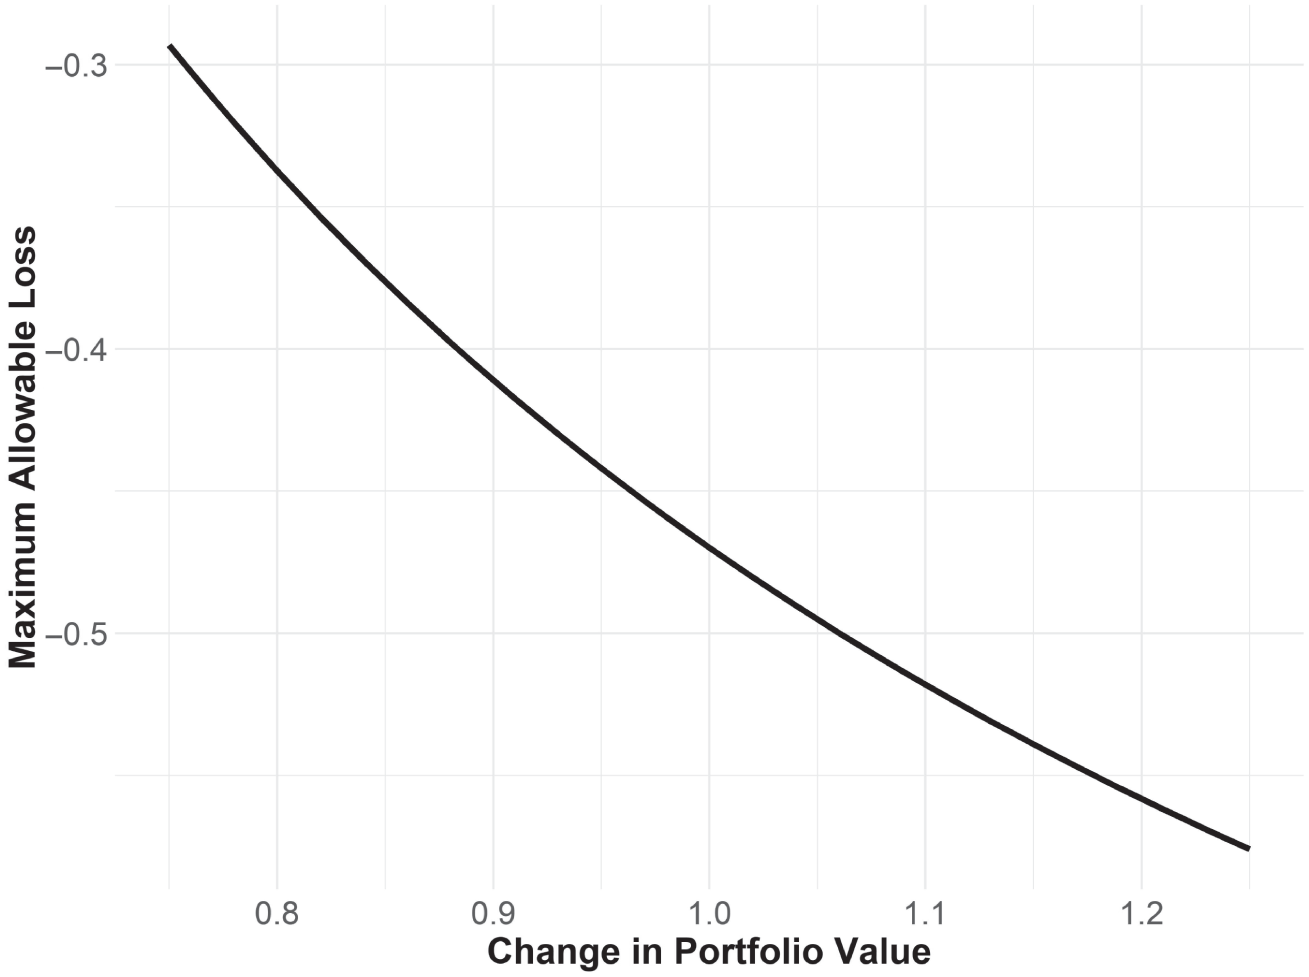 Schematic illustration of How Changes in Portfolio Value Affects Loss Tolerance Goal is to have $1 in in 10 years, with $0.80 in current wealth, no portfolio contributions, and a 10% per year portfolio recovery return.